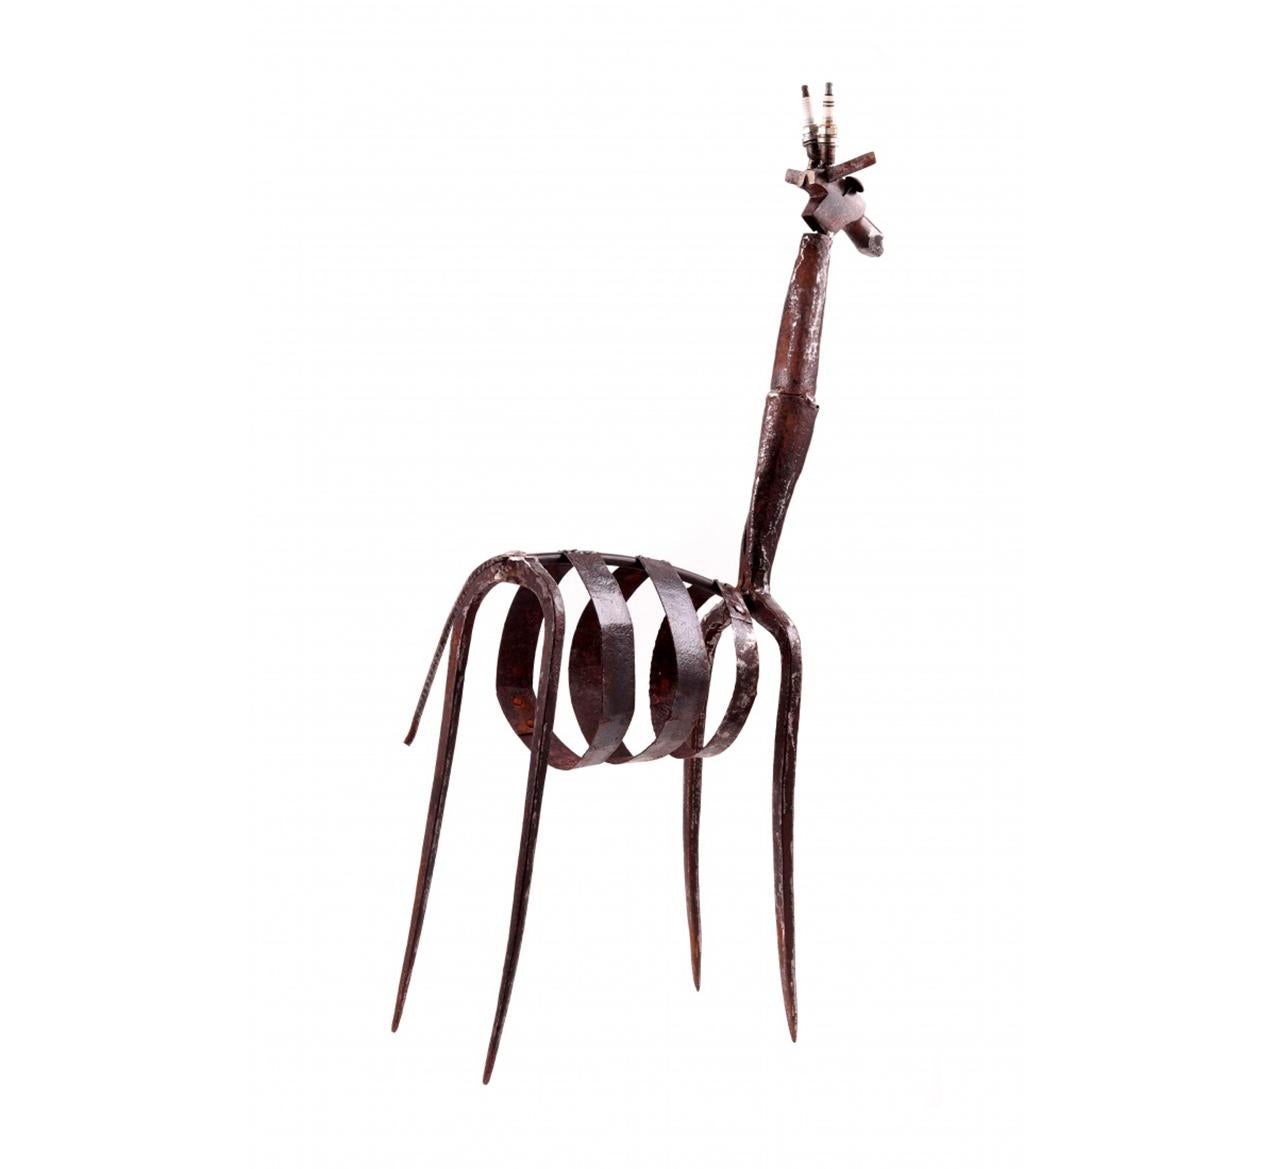 Tribal Contemporary Giraffe Iron Sculpture, with Use of Tools and Other Objects C20 For Sale